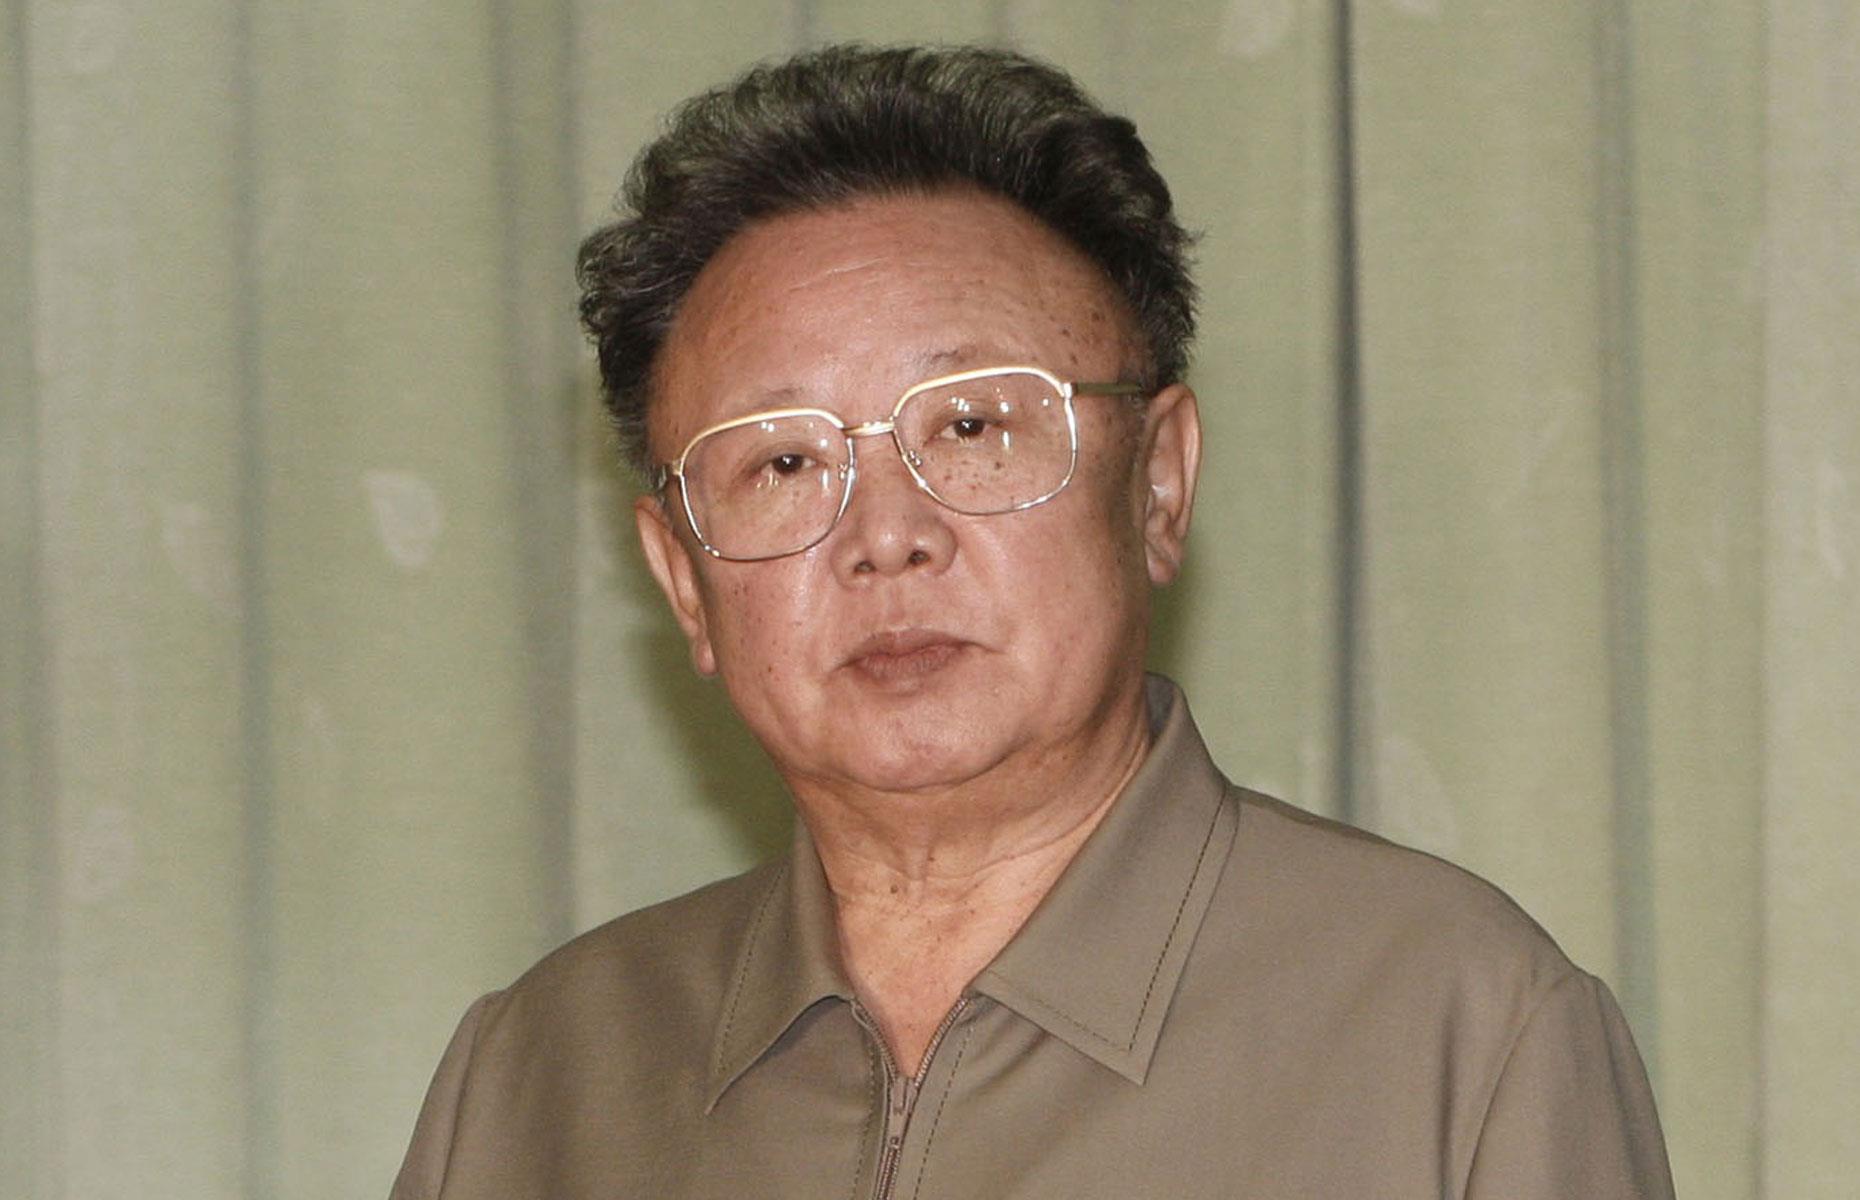 Another dictator who put his people through hell, North Korea's Kim Jong-il stole an estimated $4 billion while many of his citizens were starving to death. The late despot's so-called slush fund was managed by Ri Su-yong, North Korea's former ambassador to Switzerland, who deposited the cash in clandestine Swiss bank accounts.